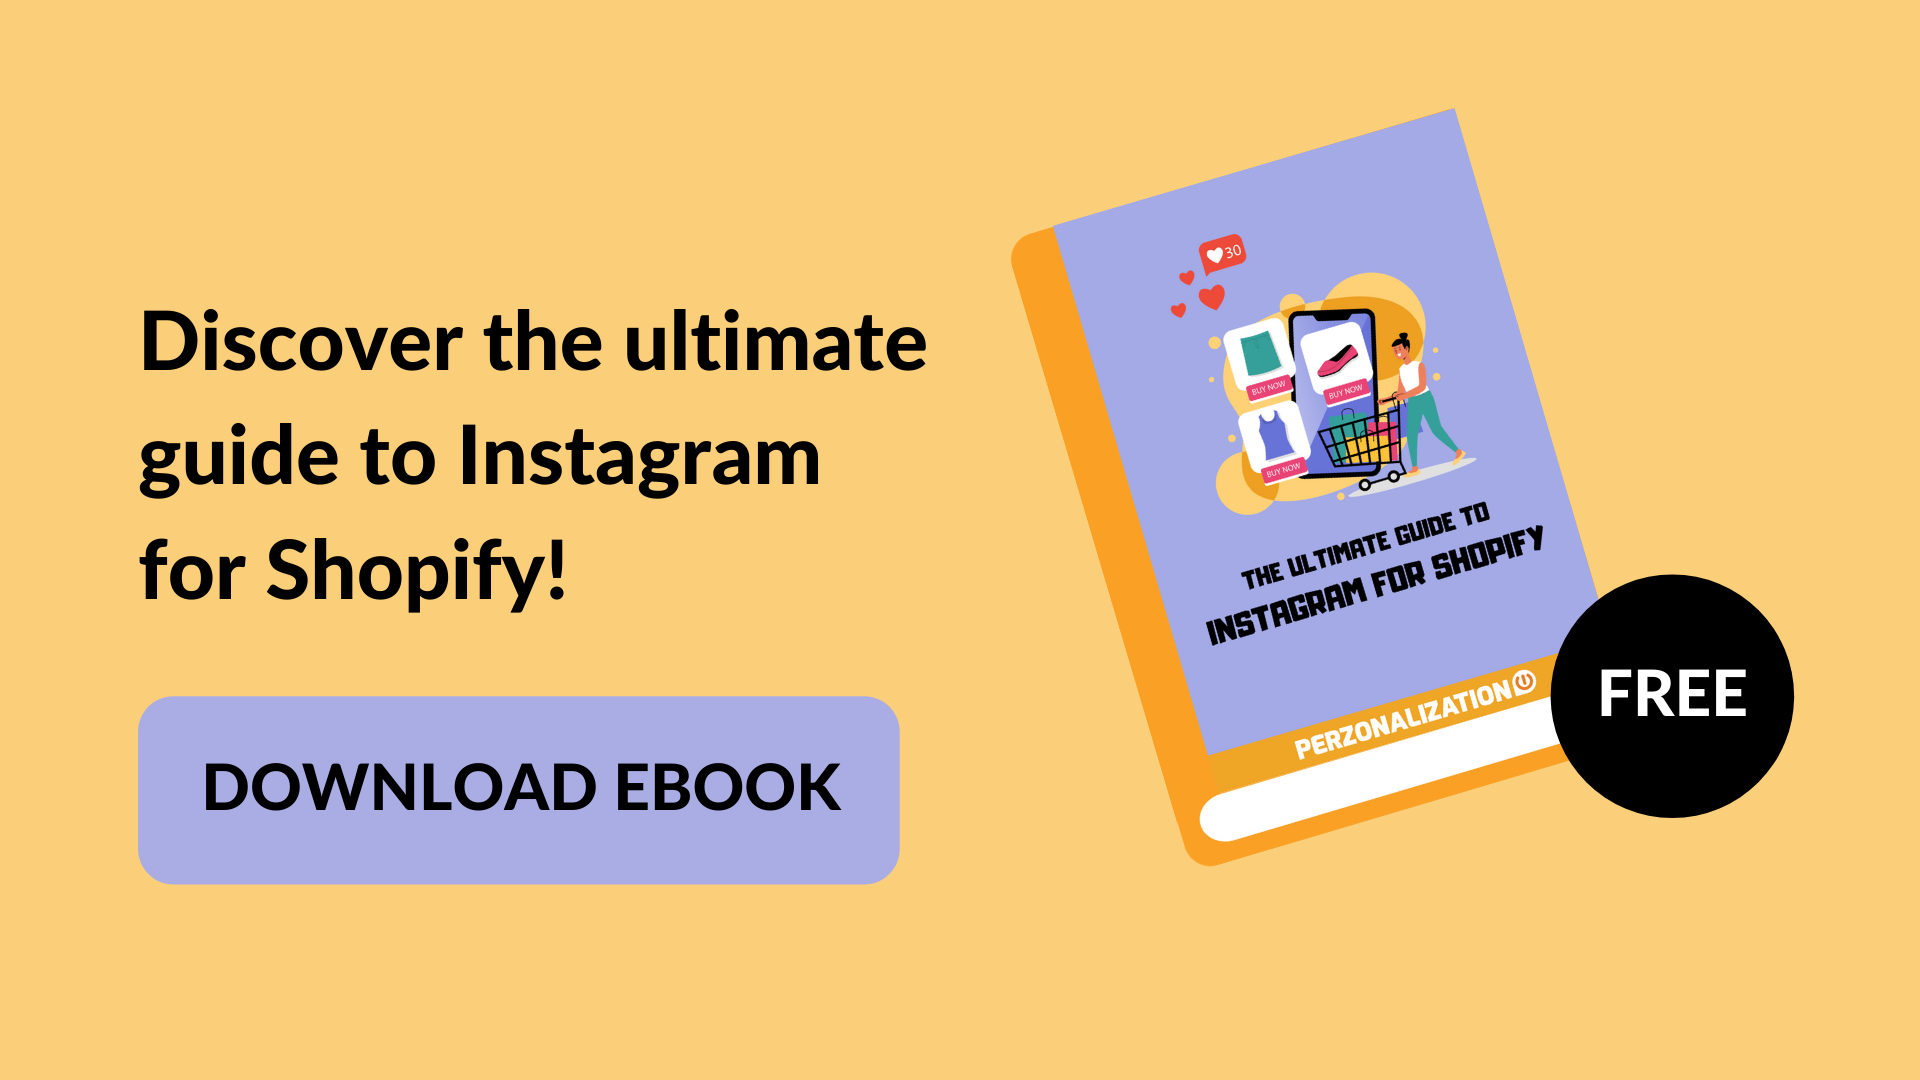 Instagram for Shopify will eventually benefit your eCommerce store as it enables you to sell more effectively on both the channels. Discover more in this free eBook!